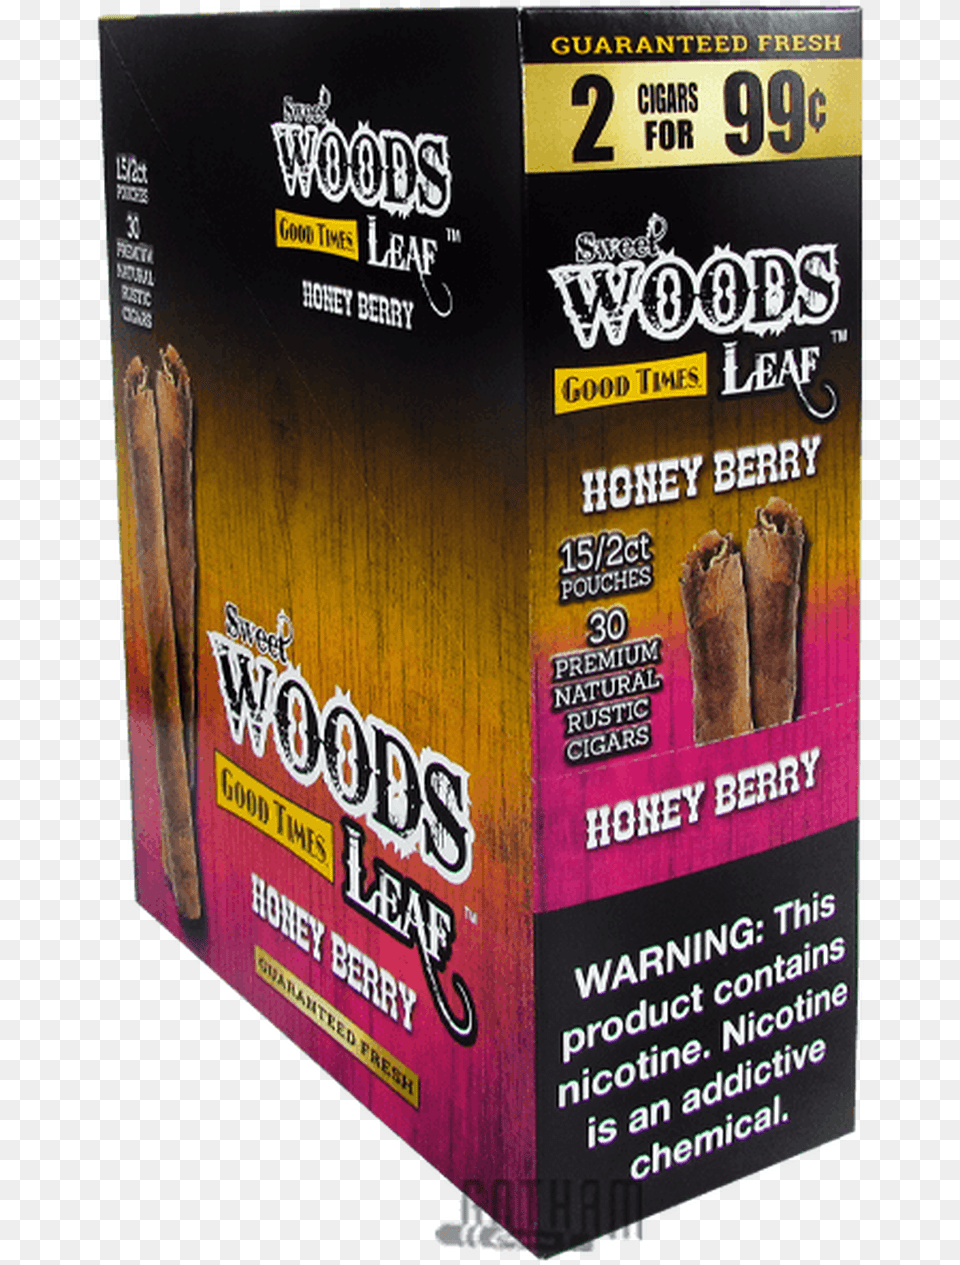 Good Times Sweet Woods Honey Berry Box Box, Book, Publication, Advertisement Free Transparent Png